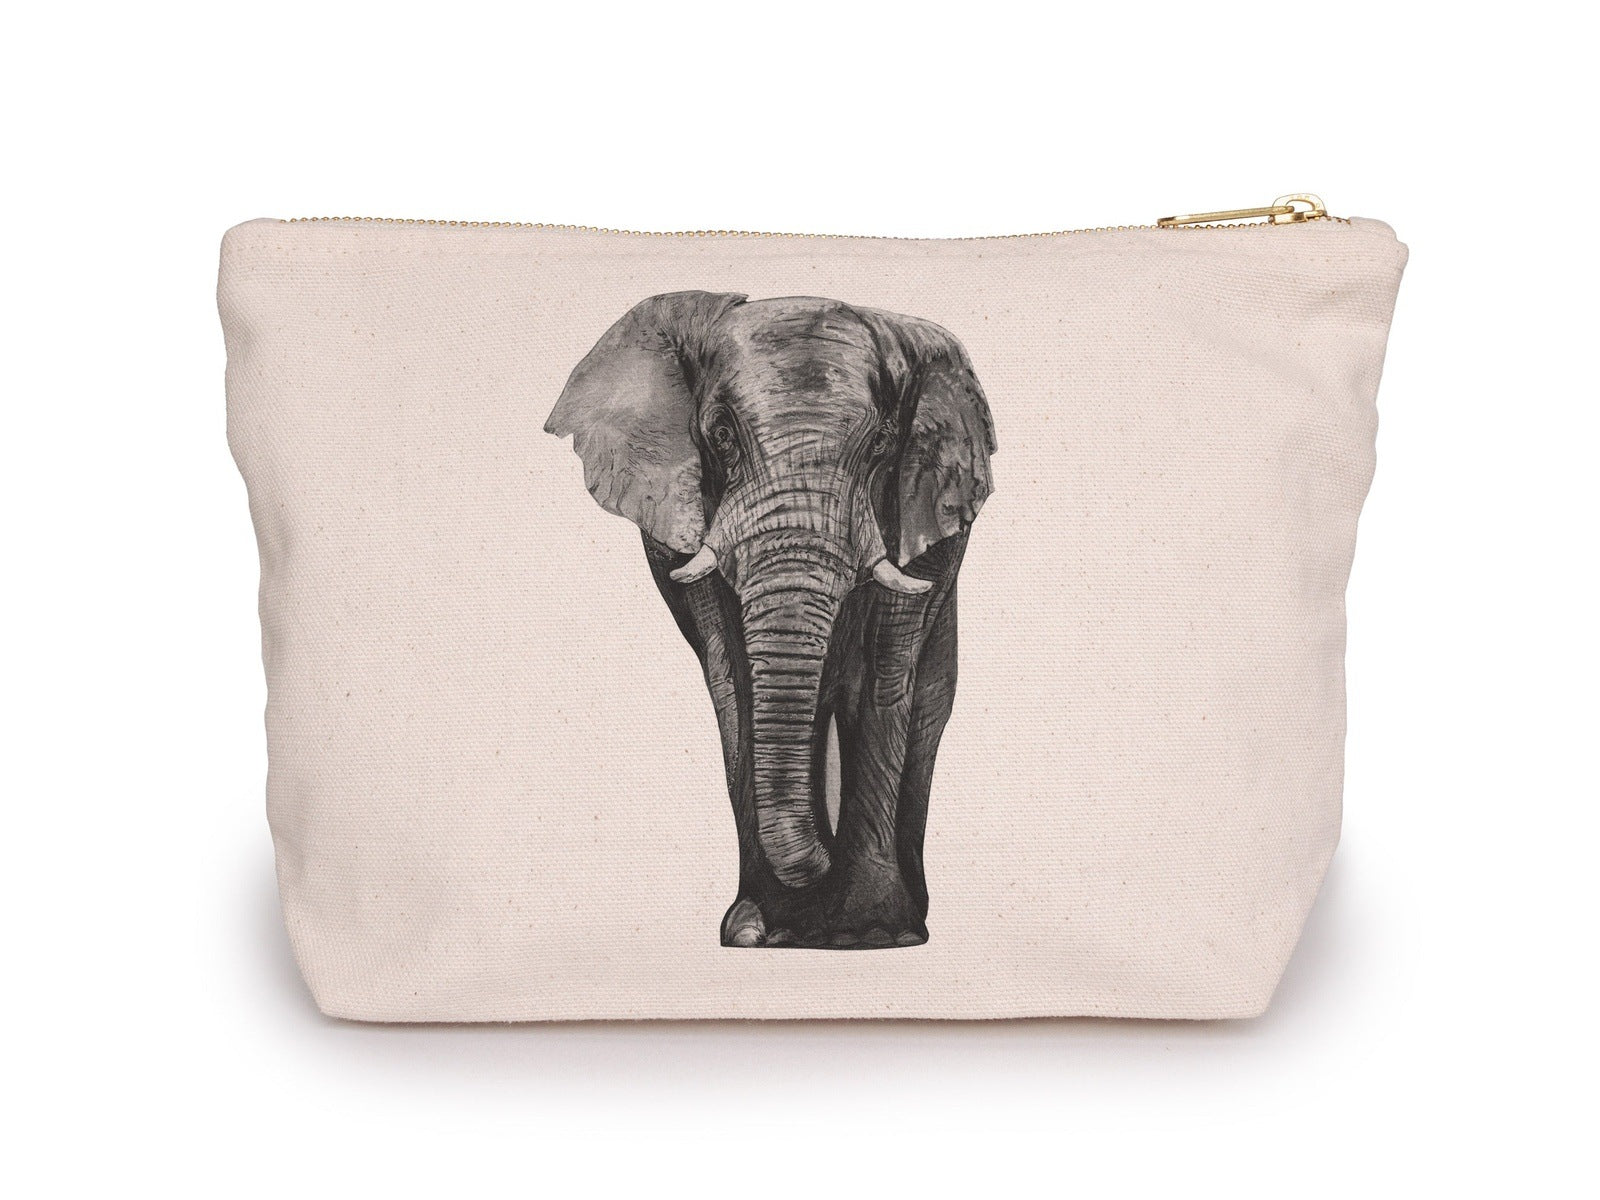 Elephant Pouch Bag From Libra Fine Arts